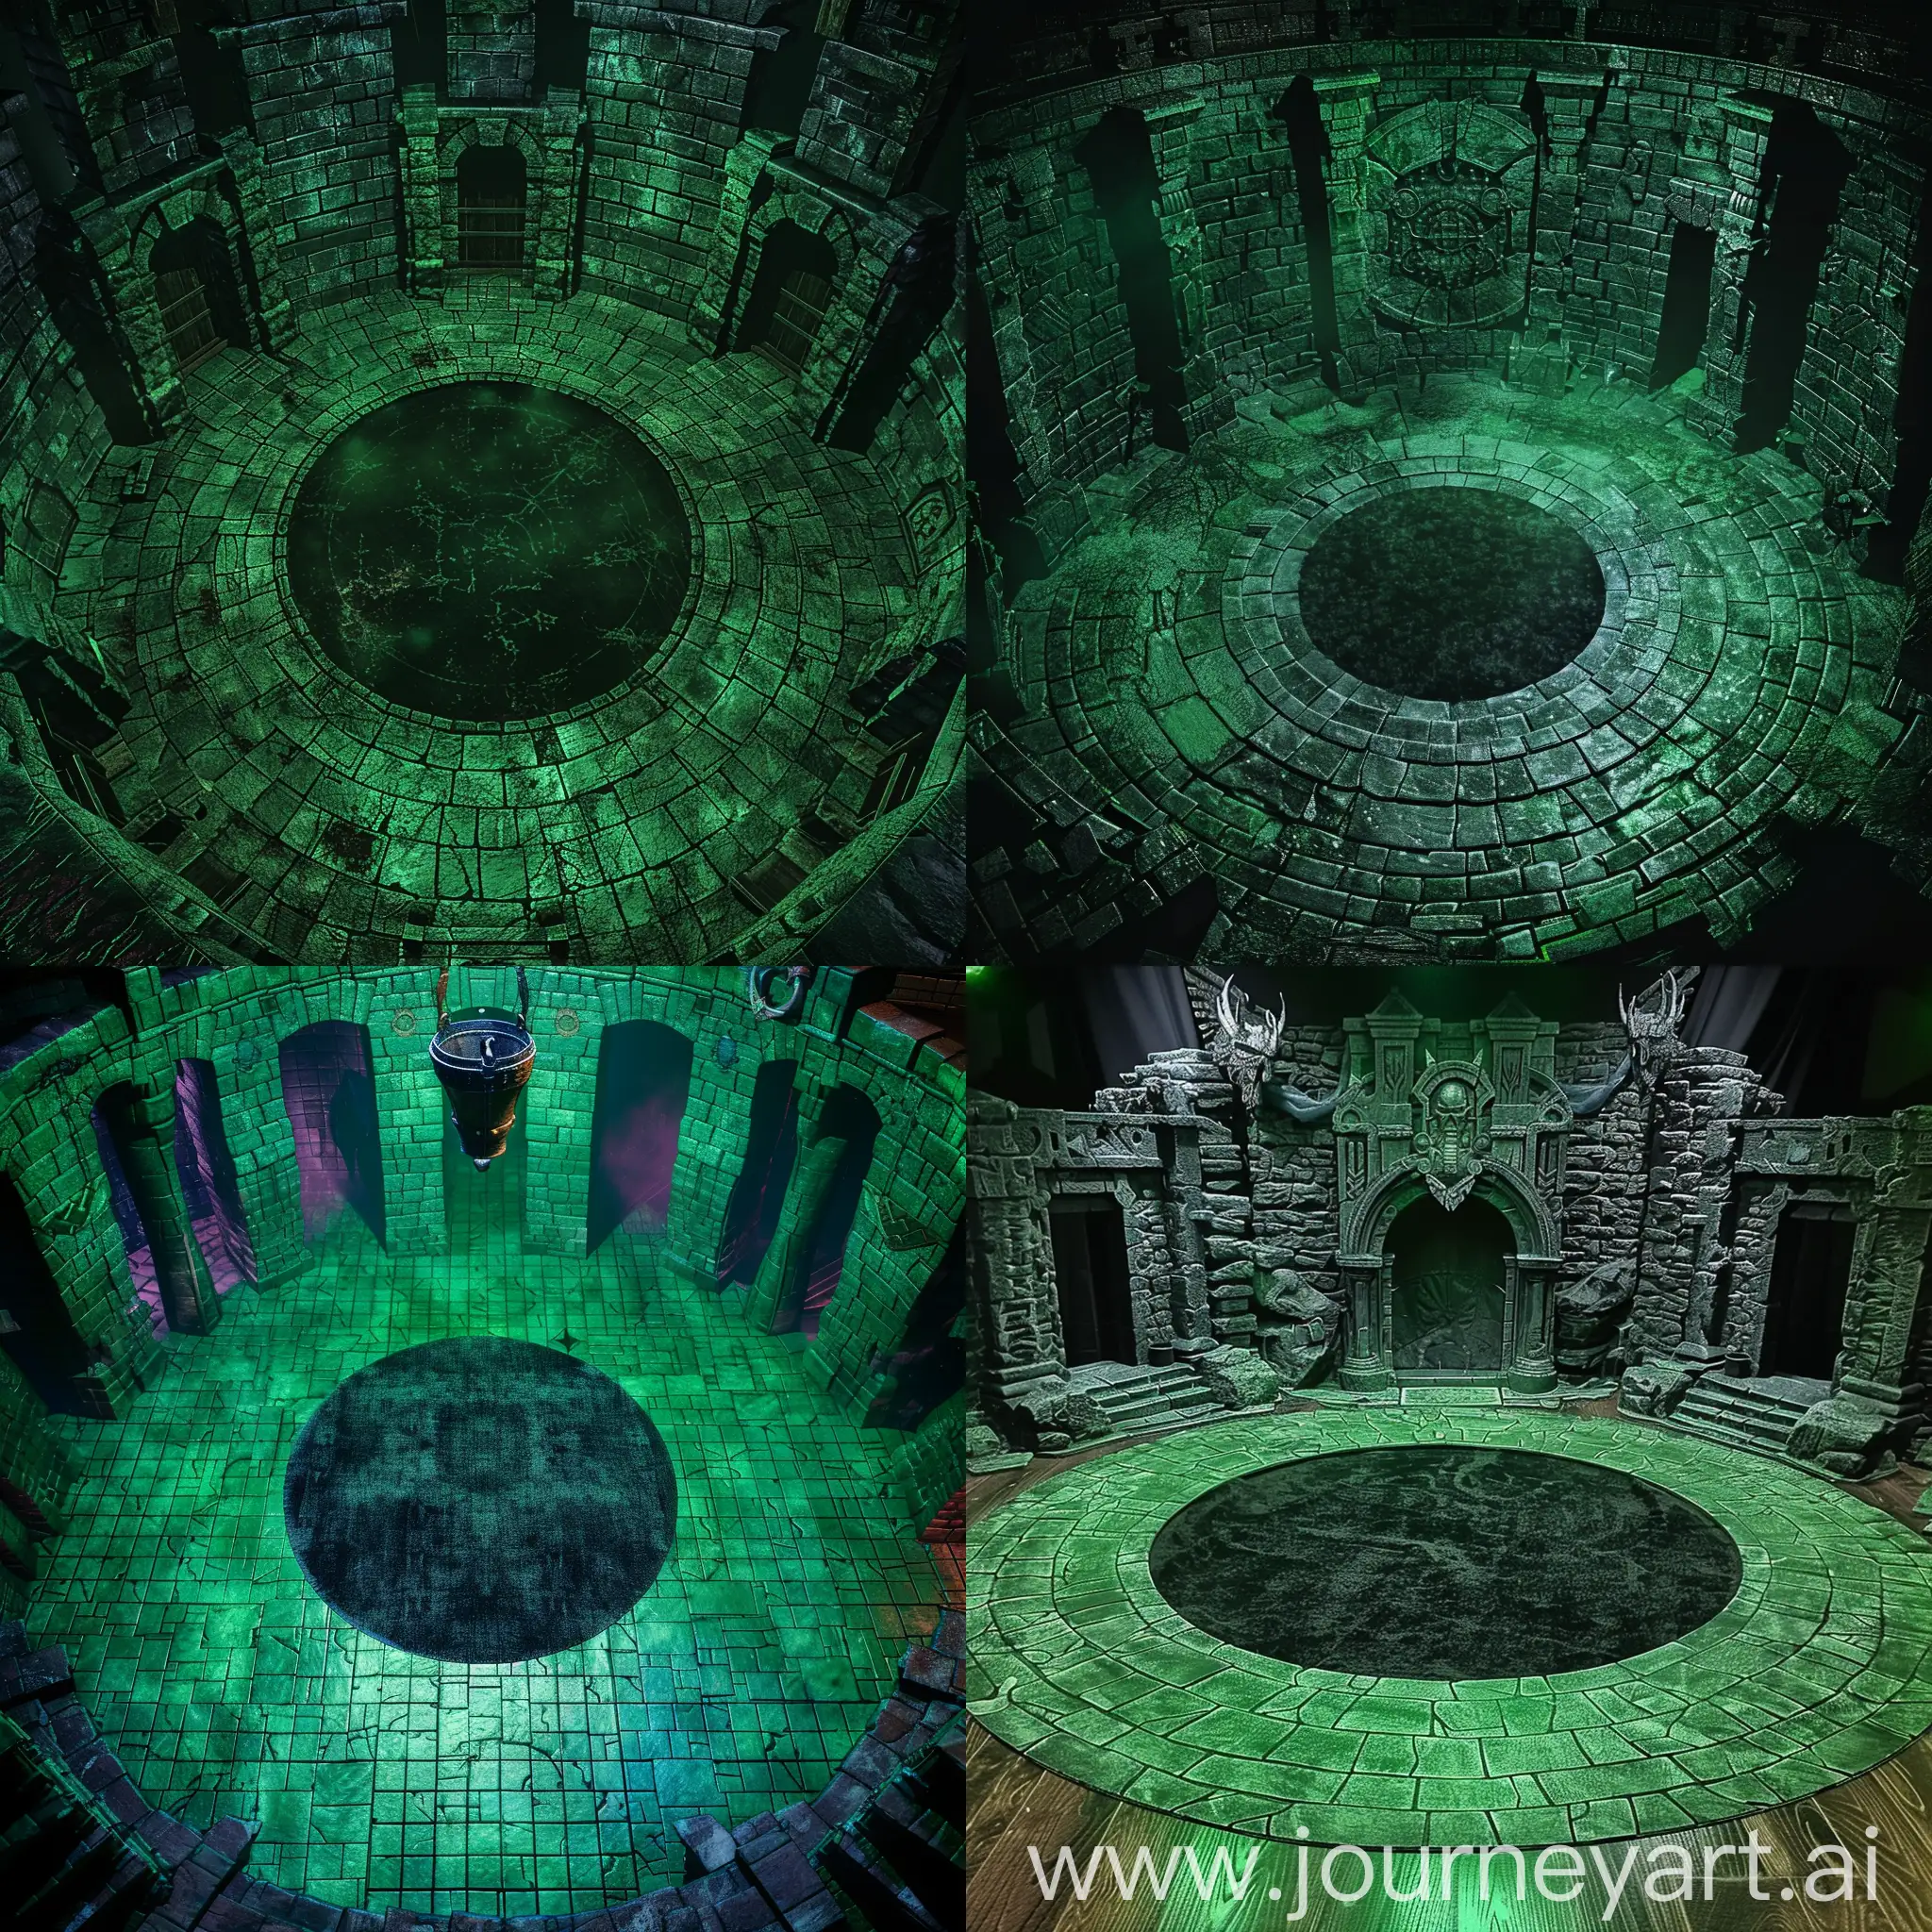 dnd dark fantasy theme,dark green dungeon court .There is a big black round carpet  on the midde of the court.